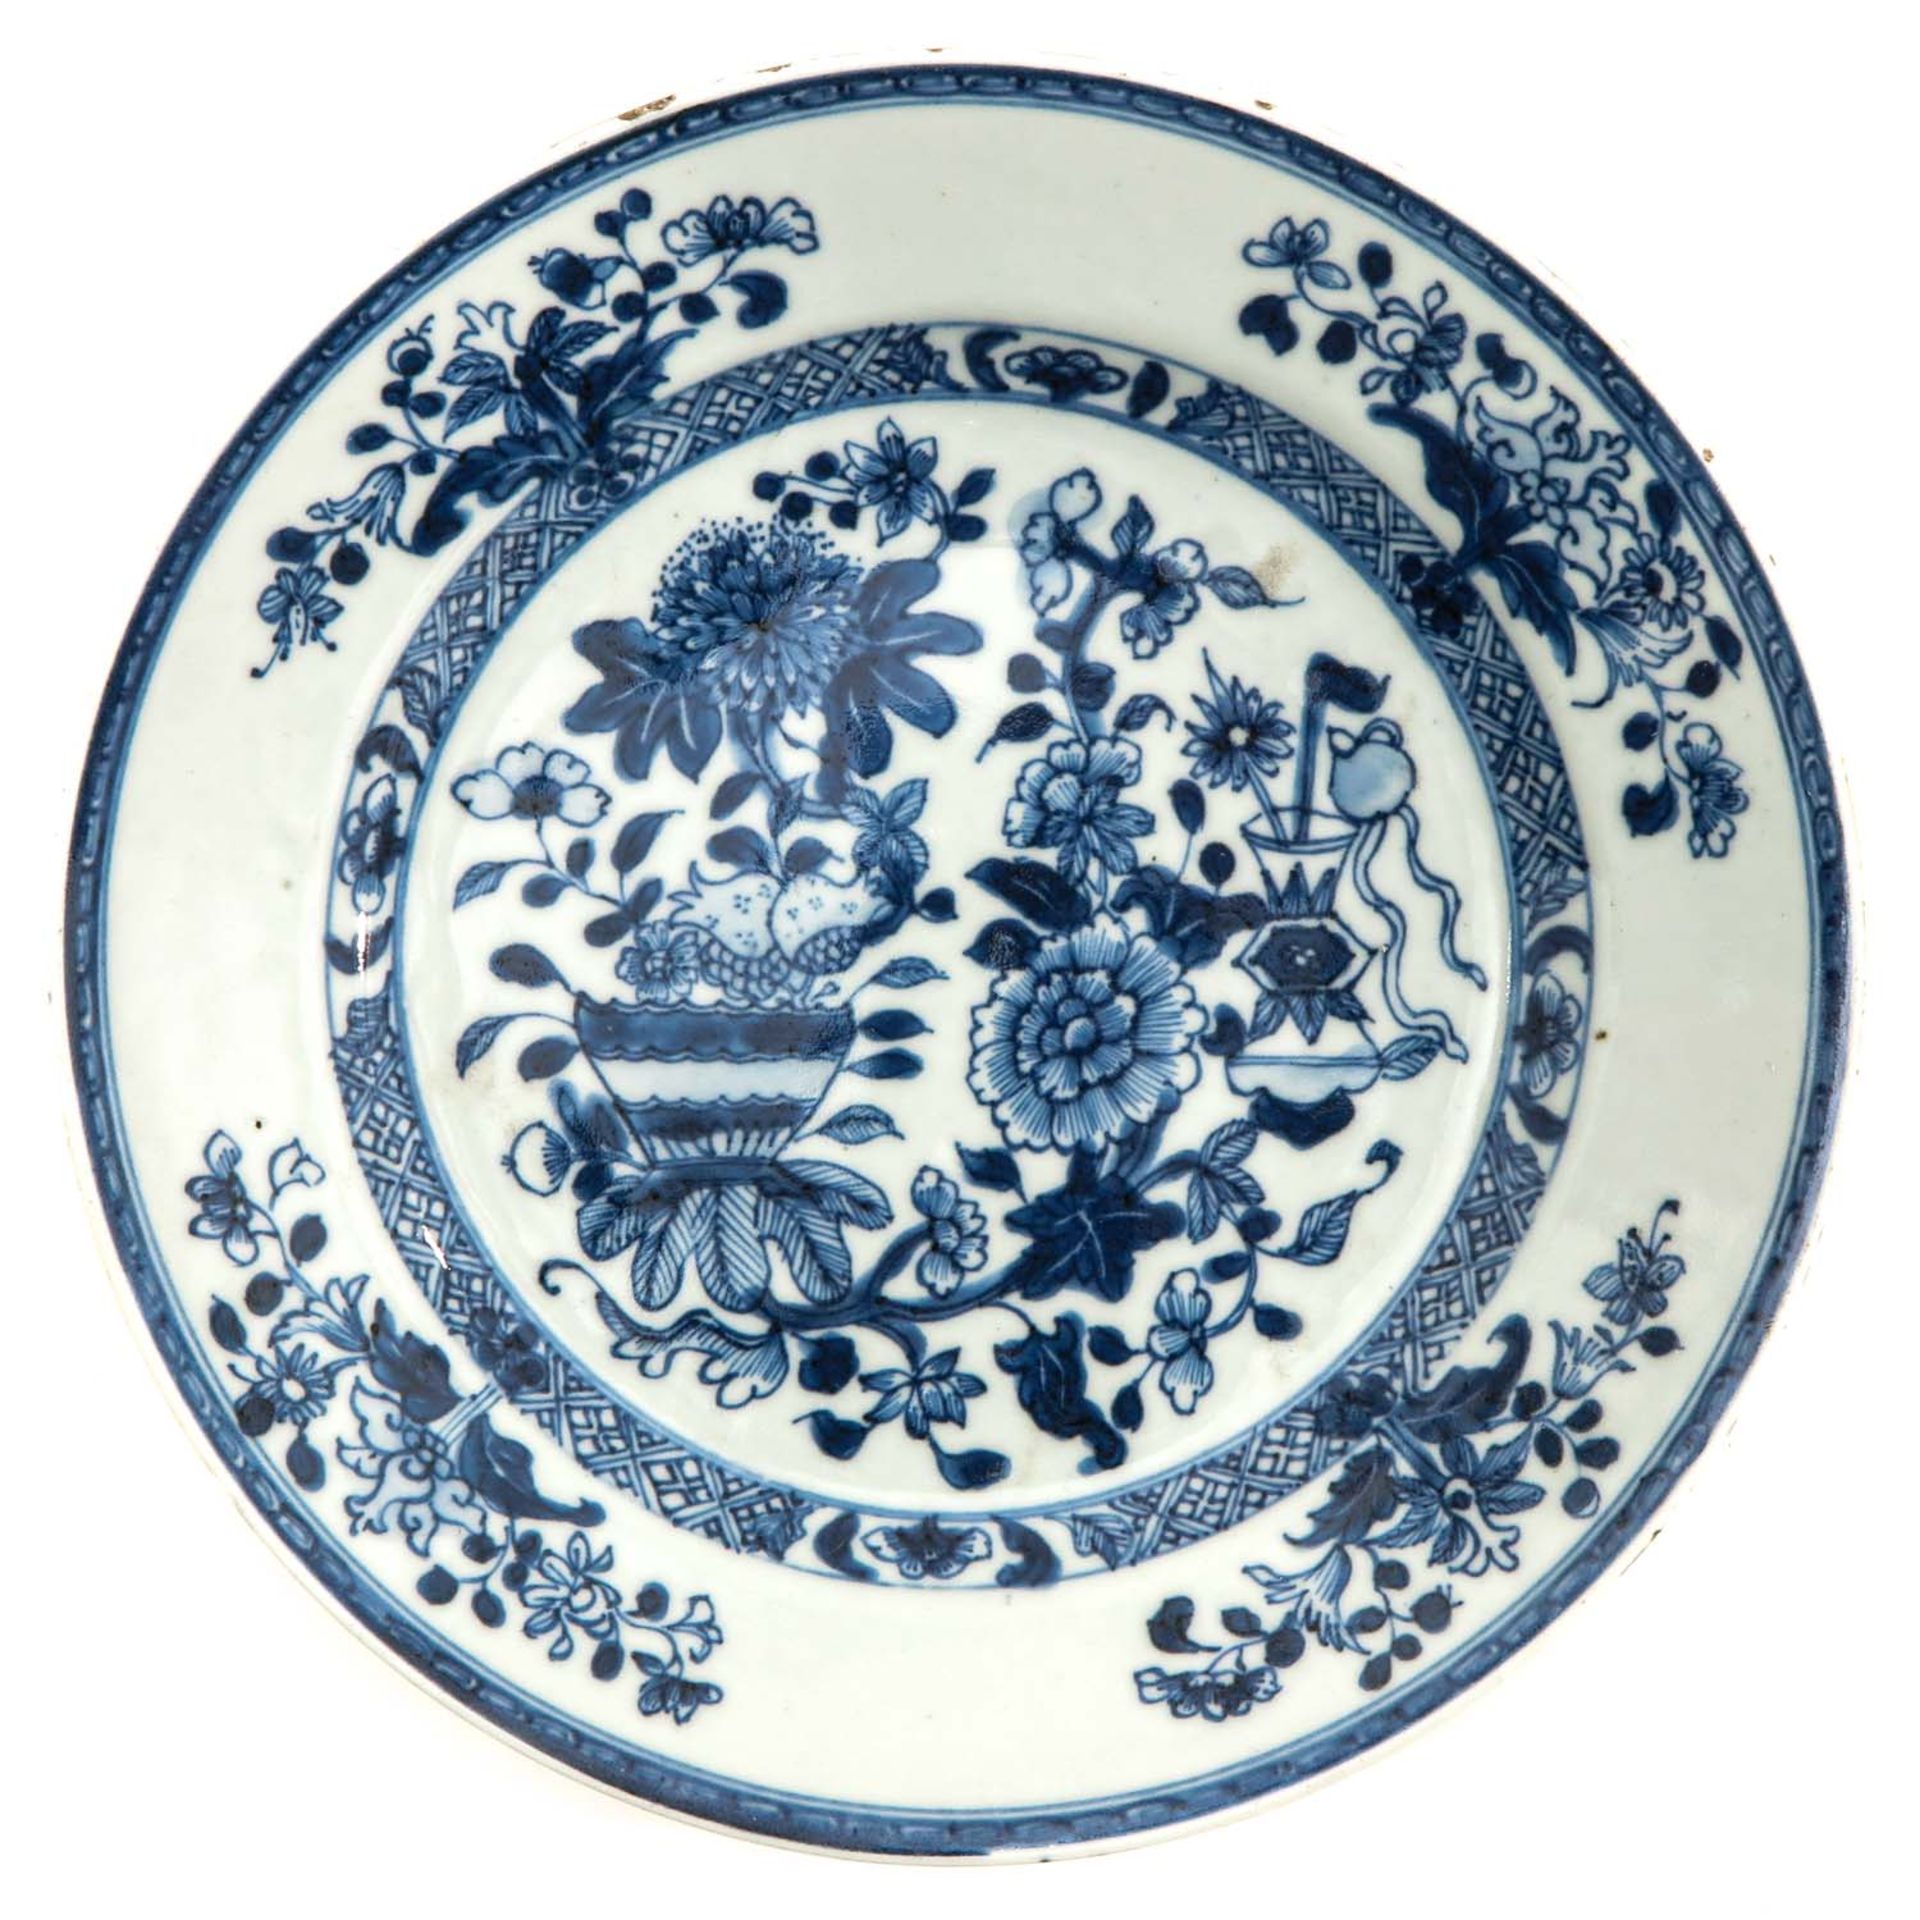 A Collection of 3 Blue and White Plates - Bild 3 aus 10